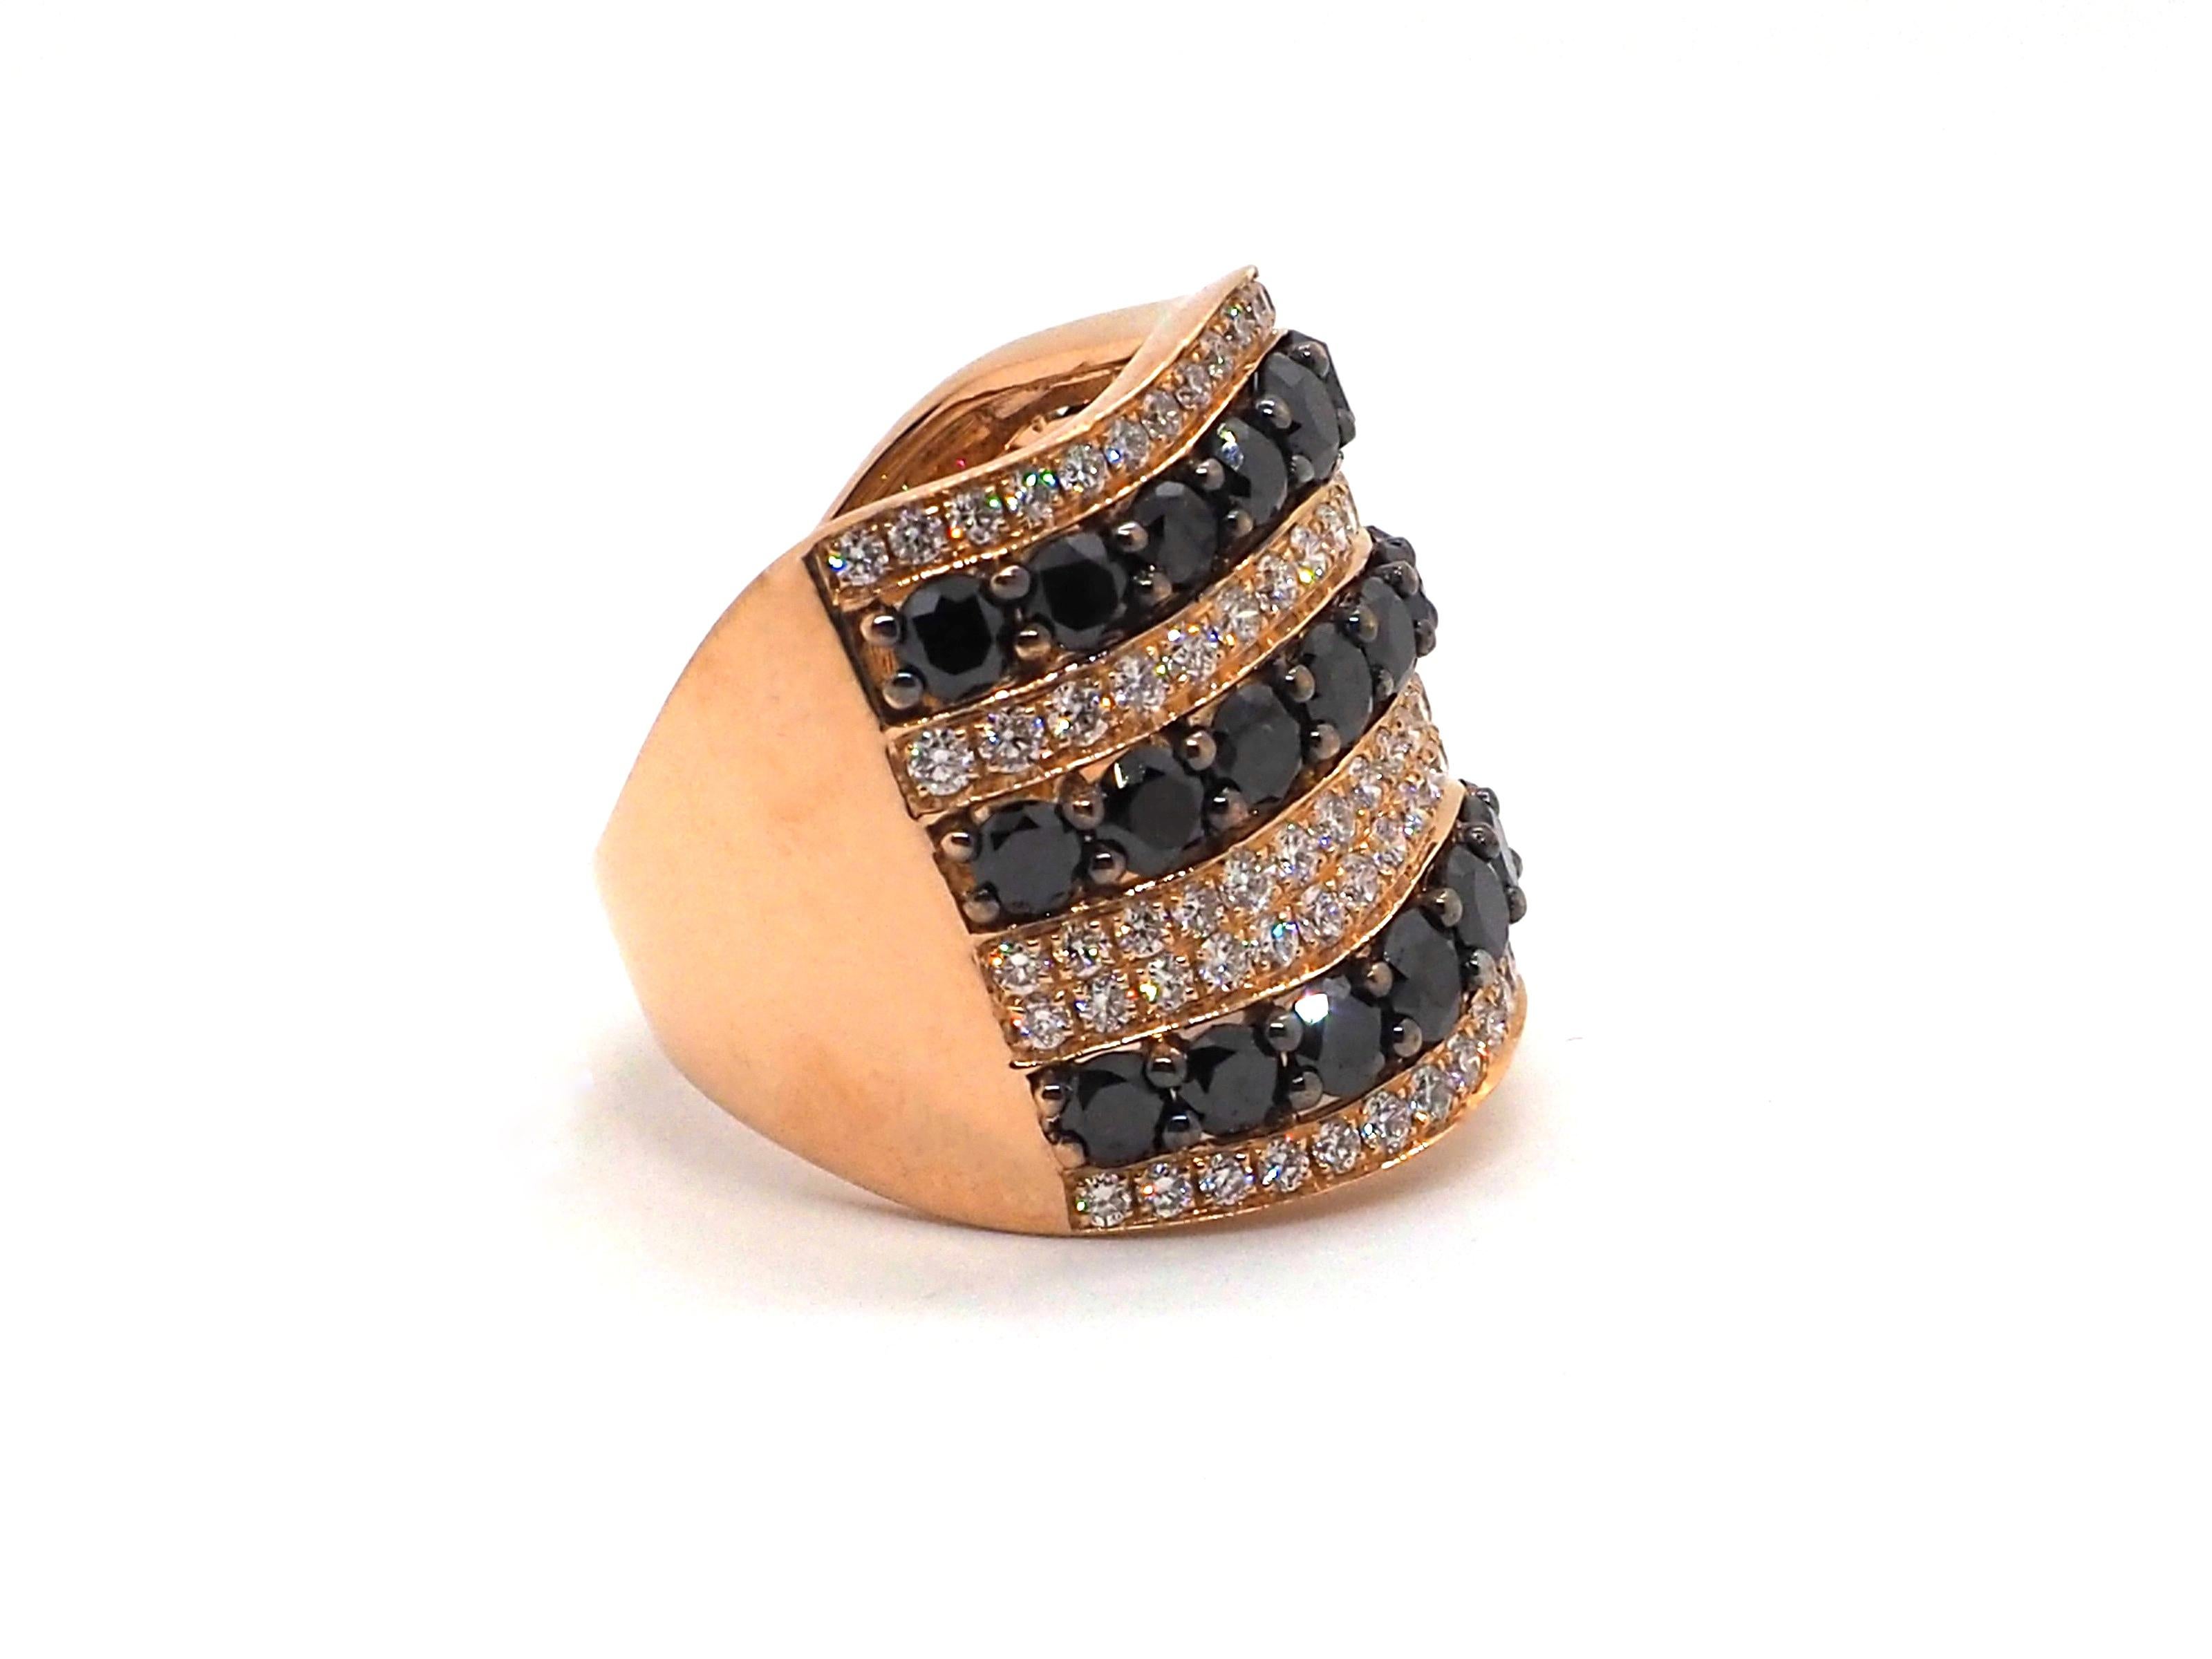 A beautiful cocktail ring crafted in 18 K rose gold. It is decorated with black ( about 3 carats) and white (1 carat) diamonds which form an ornament consisting of wavy lines.

Total weight: 11 grams
EU size: 56
US size: 7.75

The ring is in perfect